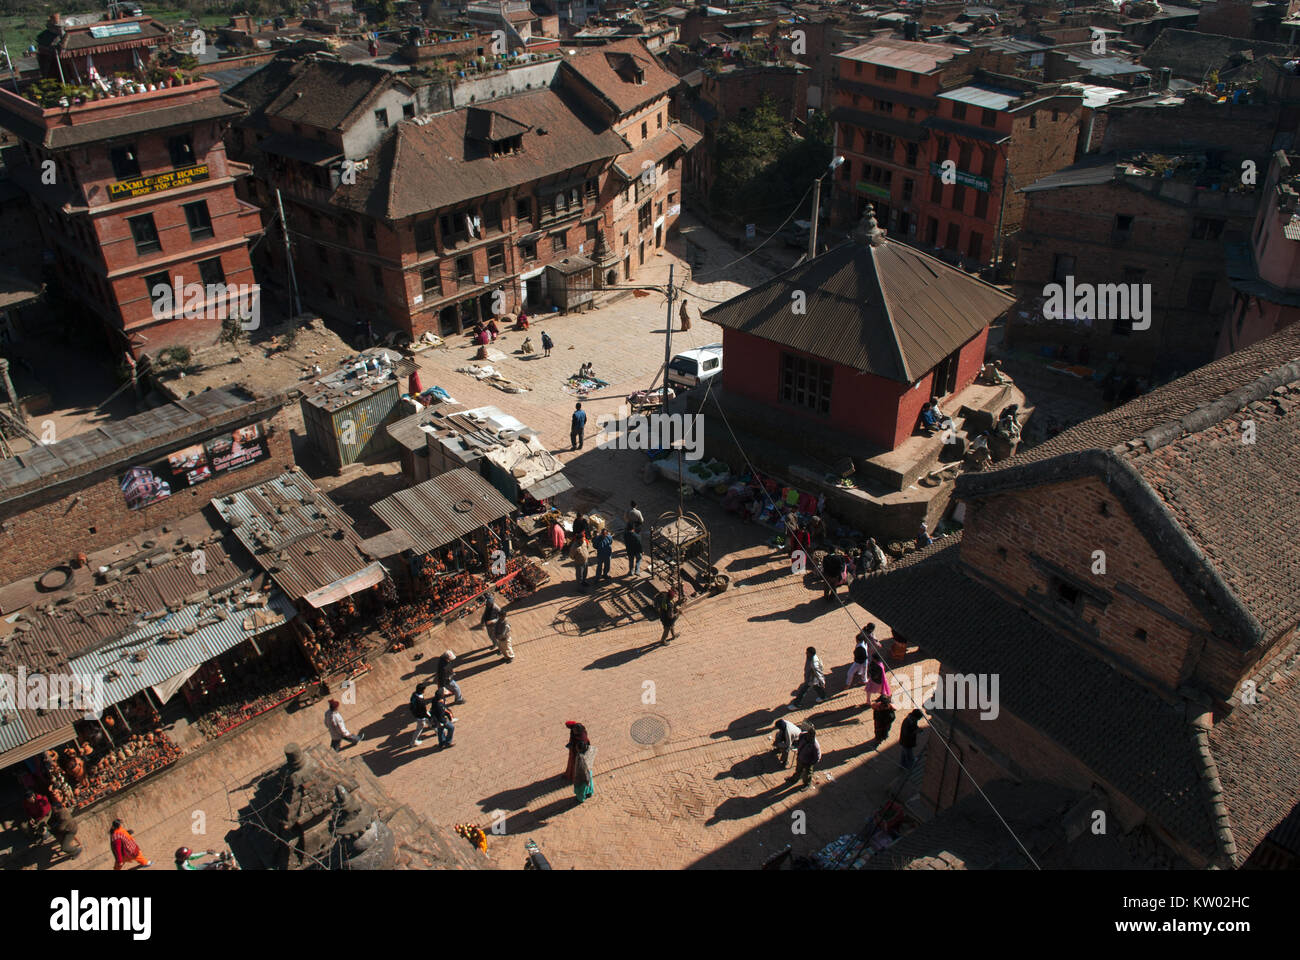 Main square of the city of Bhaktapur, Nepal, lifted from the height, before the earthquake in 2015, all buildings in safety. Stock Photo